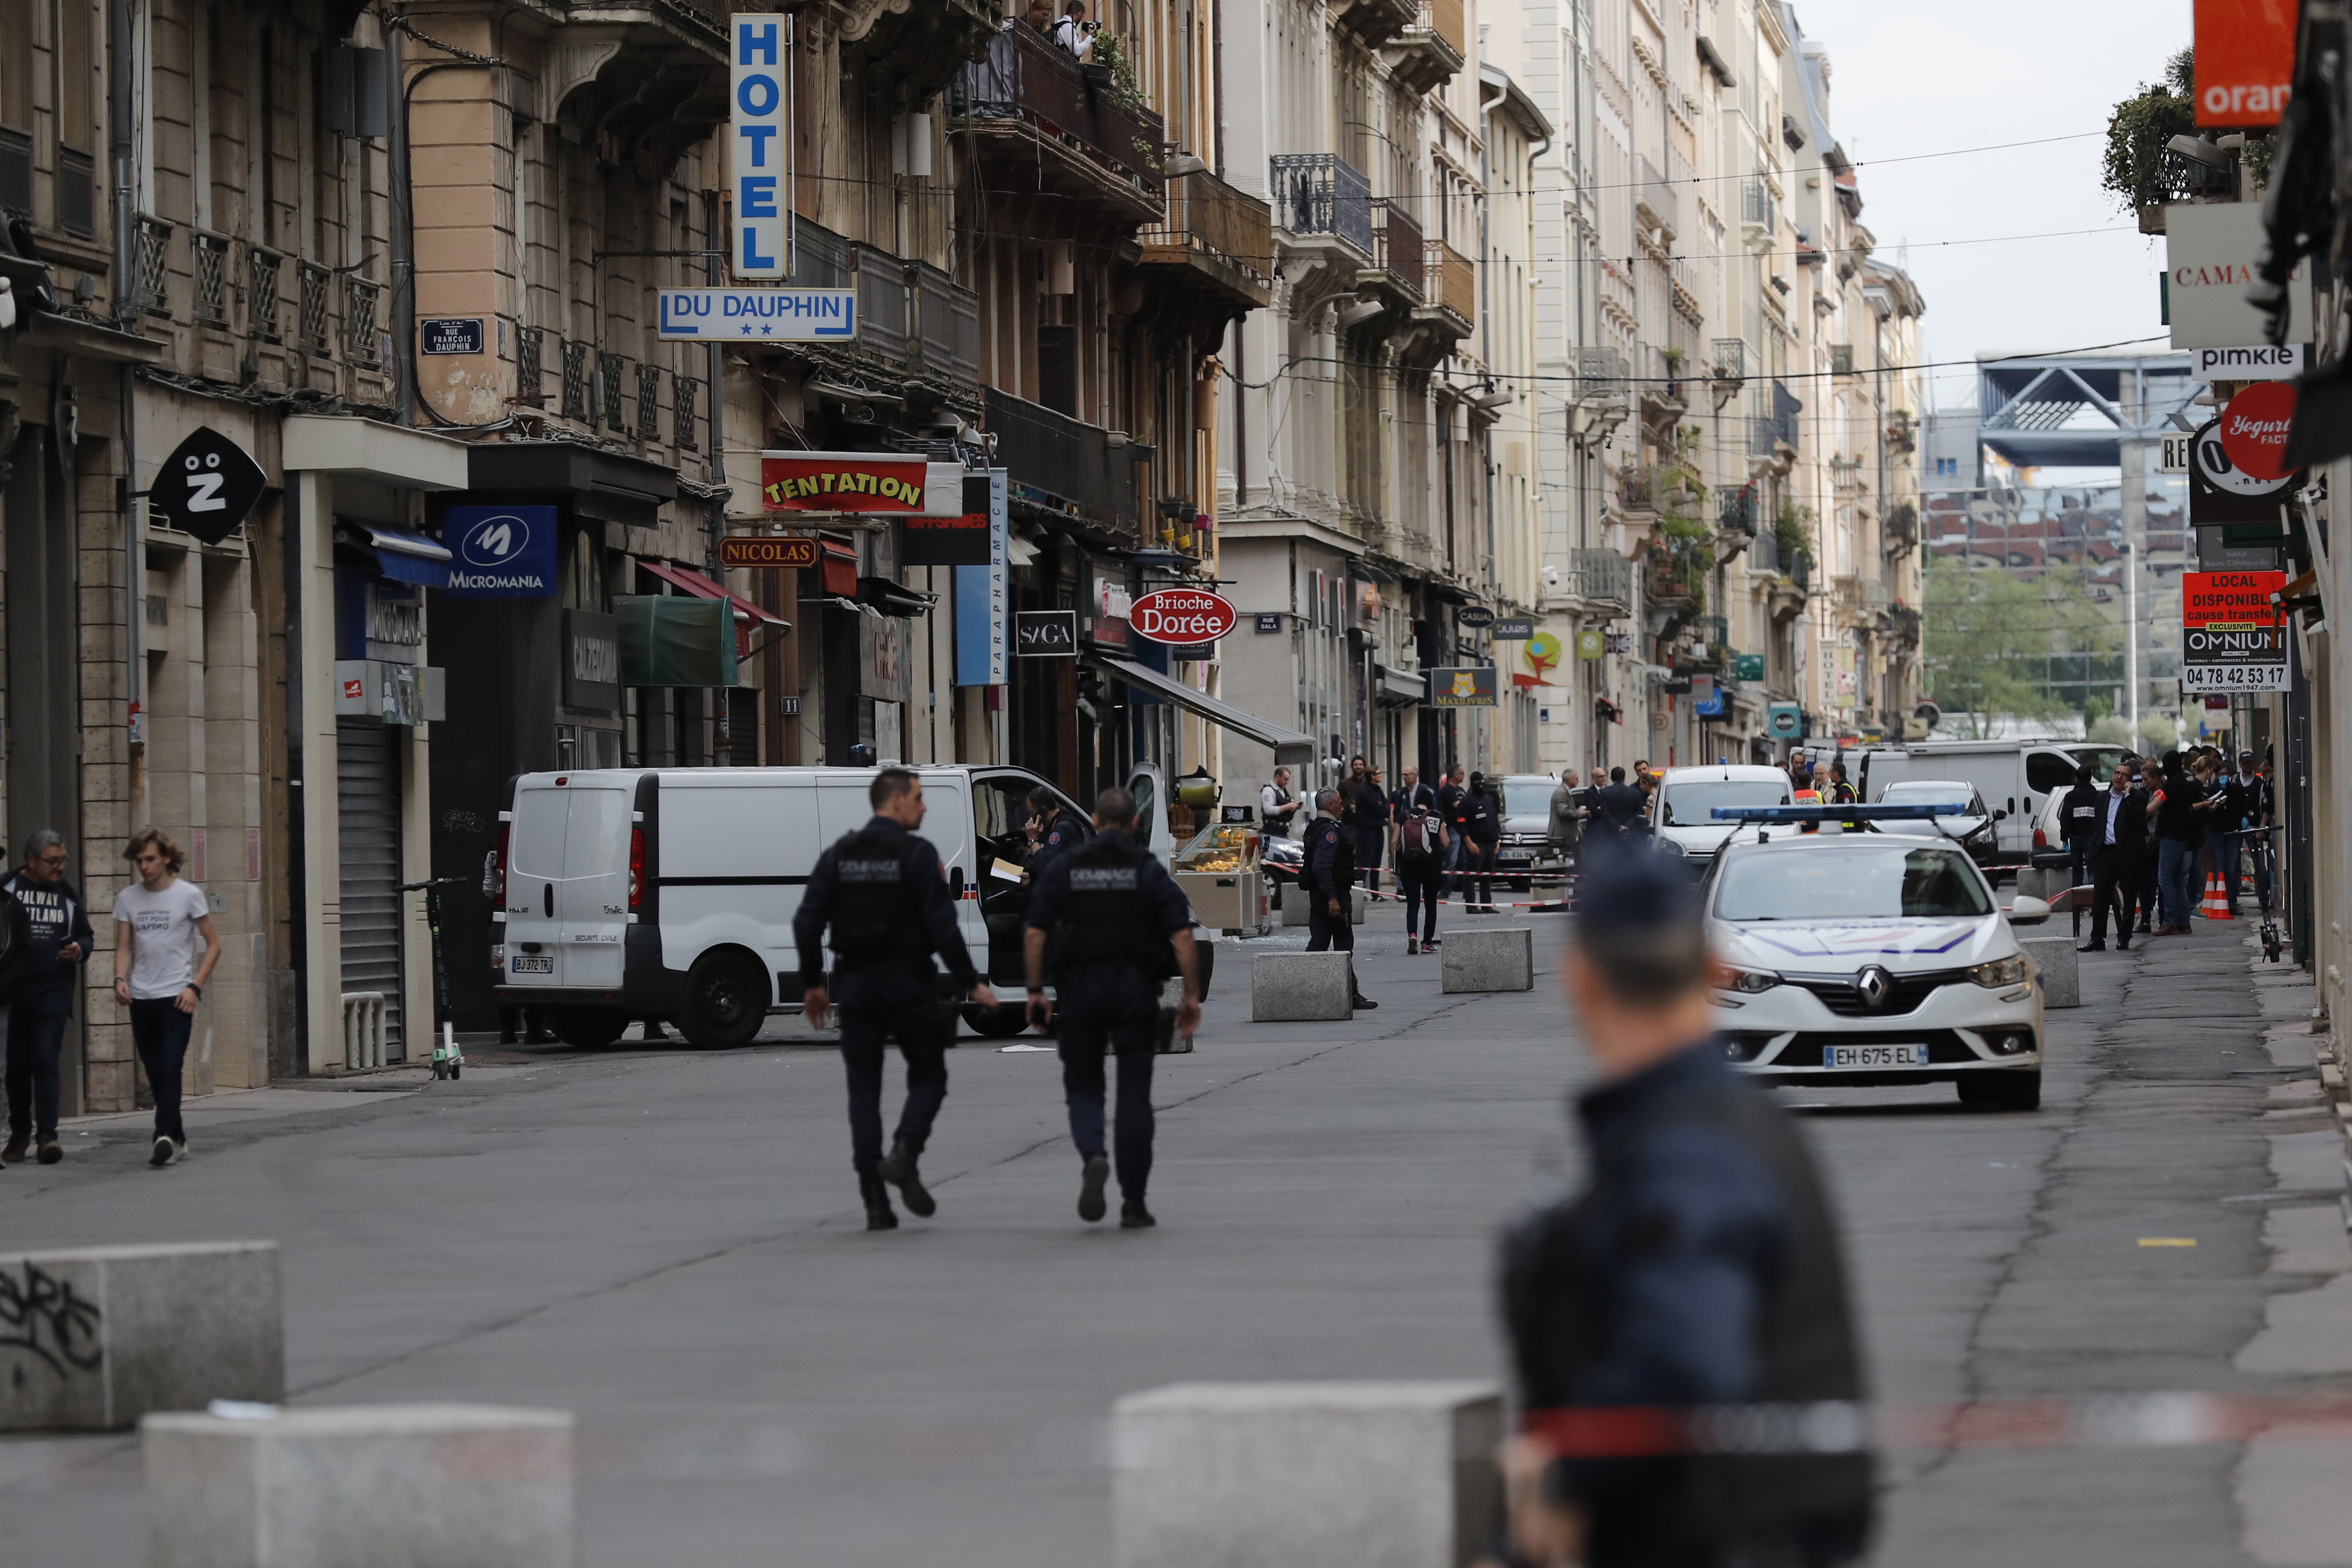 epa07598500 French police forces secure a perimeter after a suspected package exploded in rue Victor Hugo in the center of Lyon, France, 24 May 2019. The blast has wounded at least eight people, according to authorities. French president Emmanuel Macron has called it an 'attack'.  EPA/ALEX MARTIN